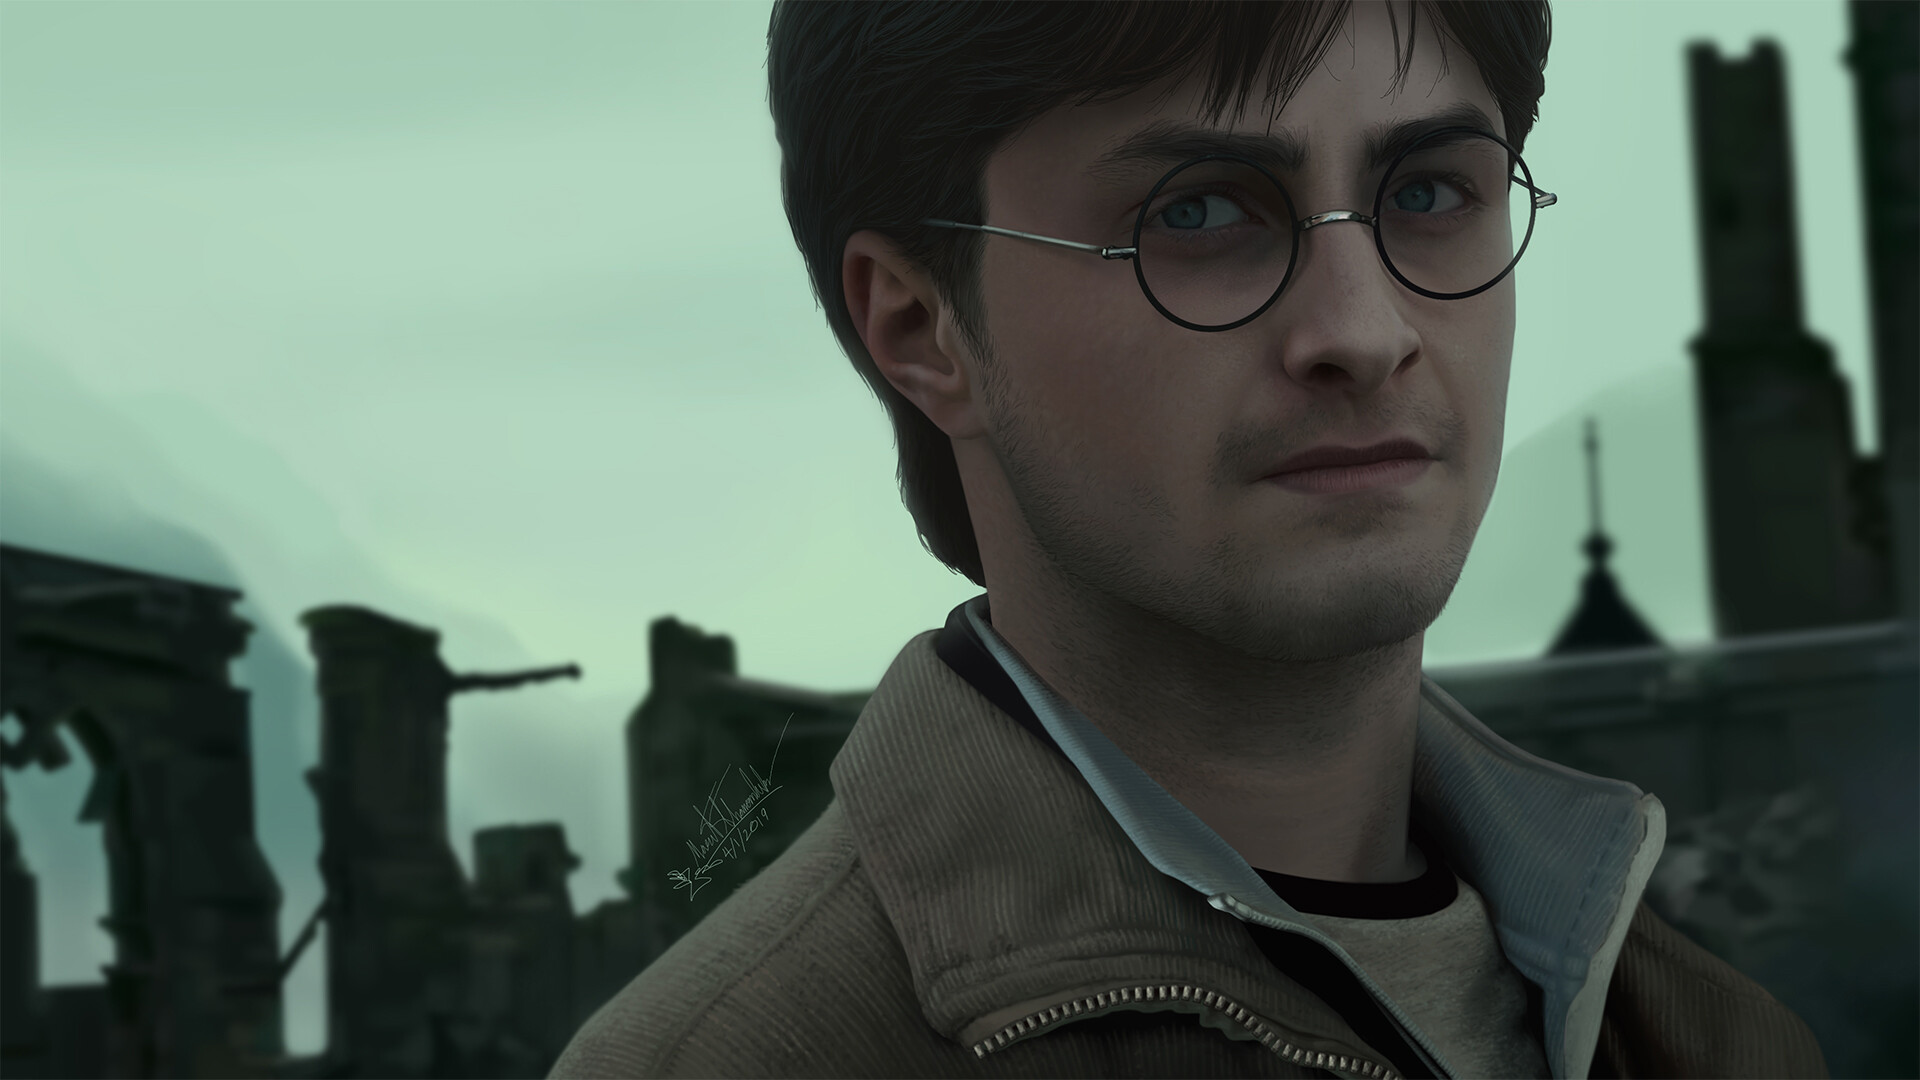 Harry Potter And The Deathly Hallows Part 2 Hd Wallpaper